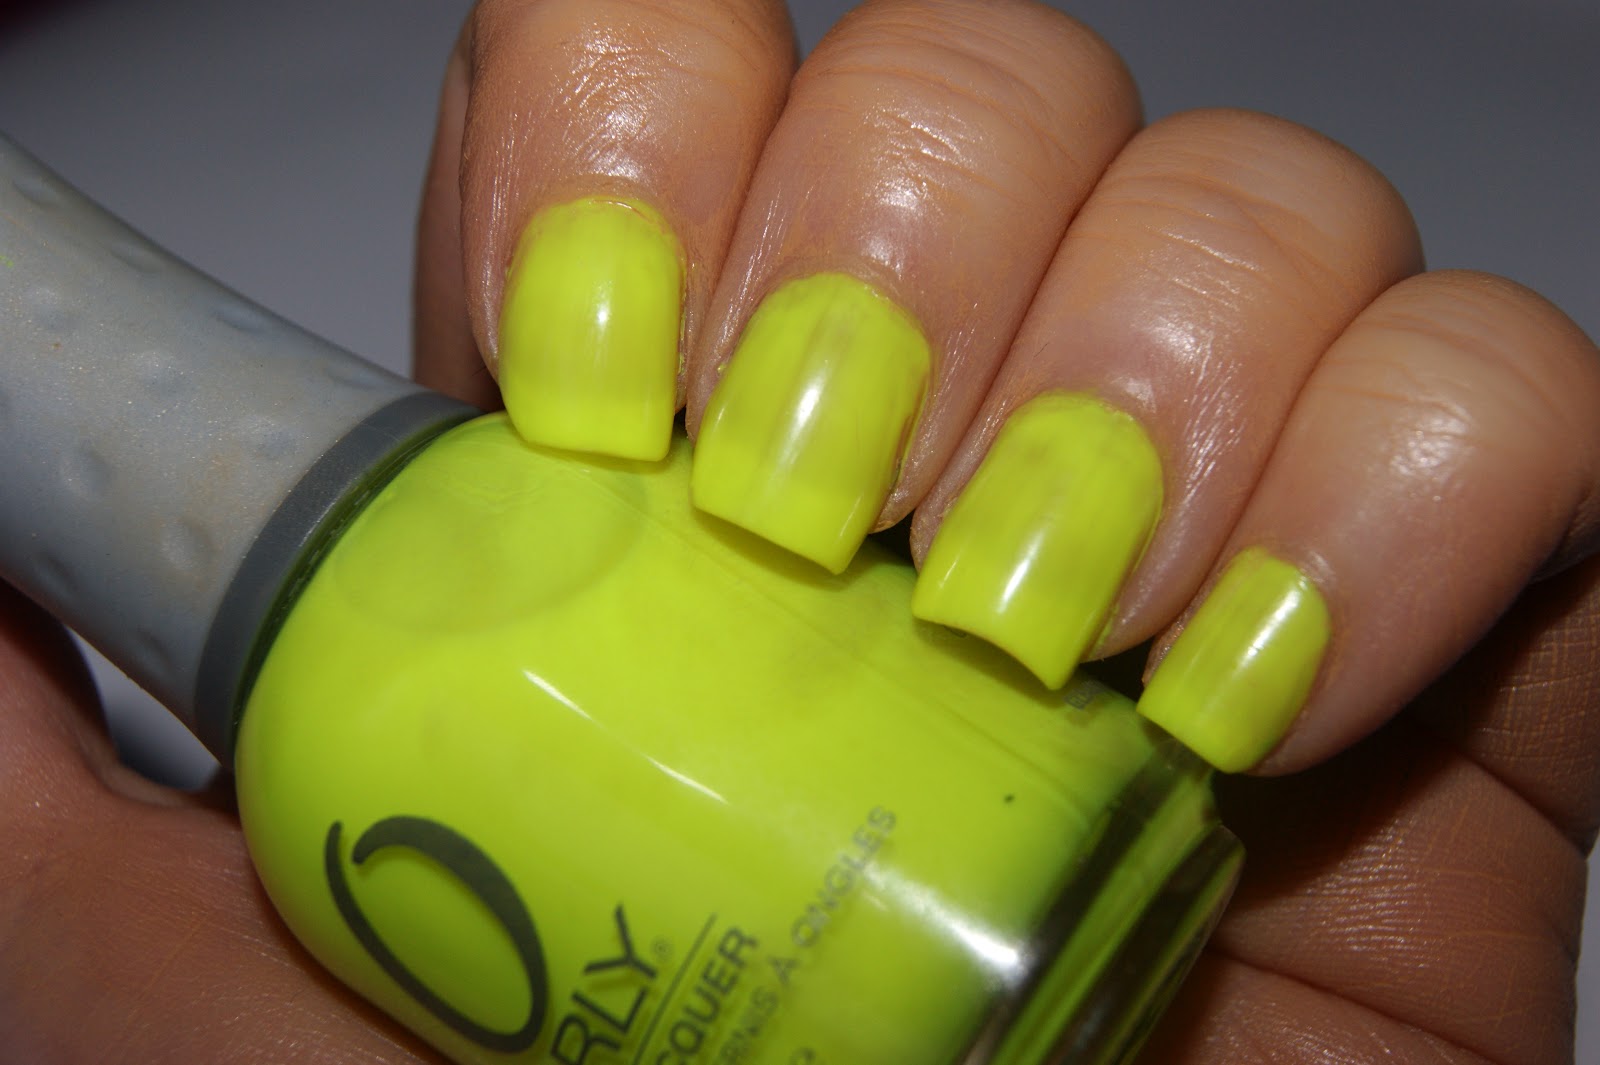 10. Orly Nail Lacquer in "Glowstick" - wide 1